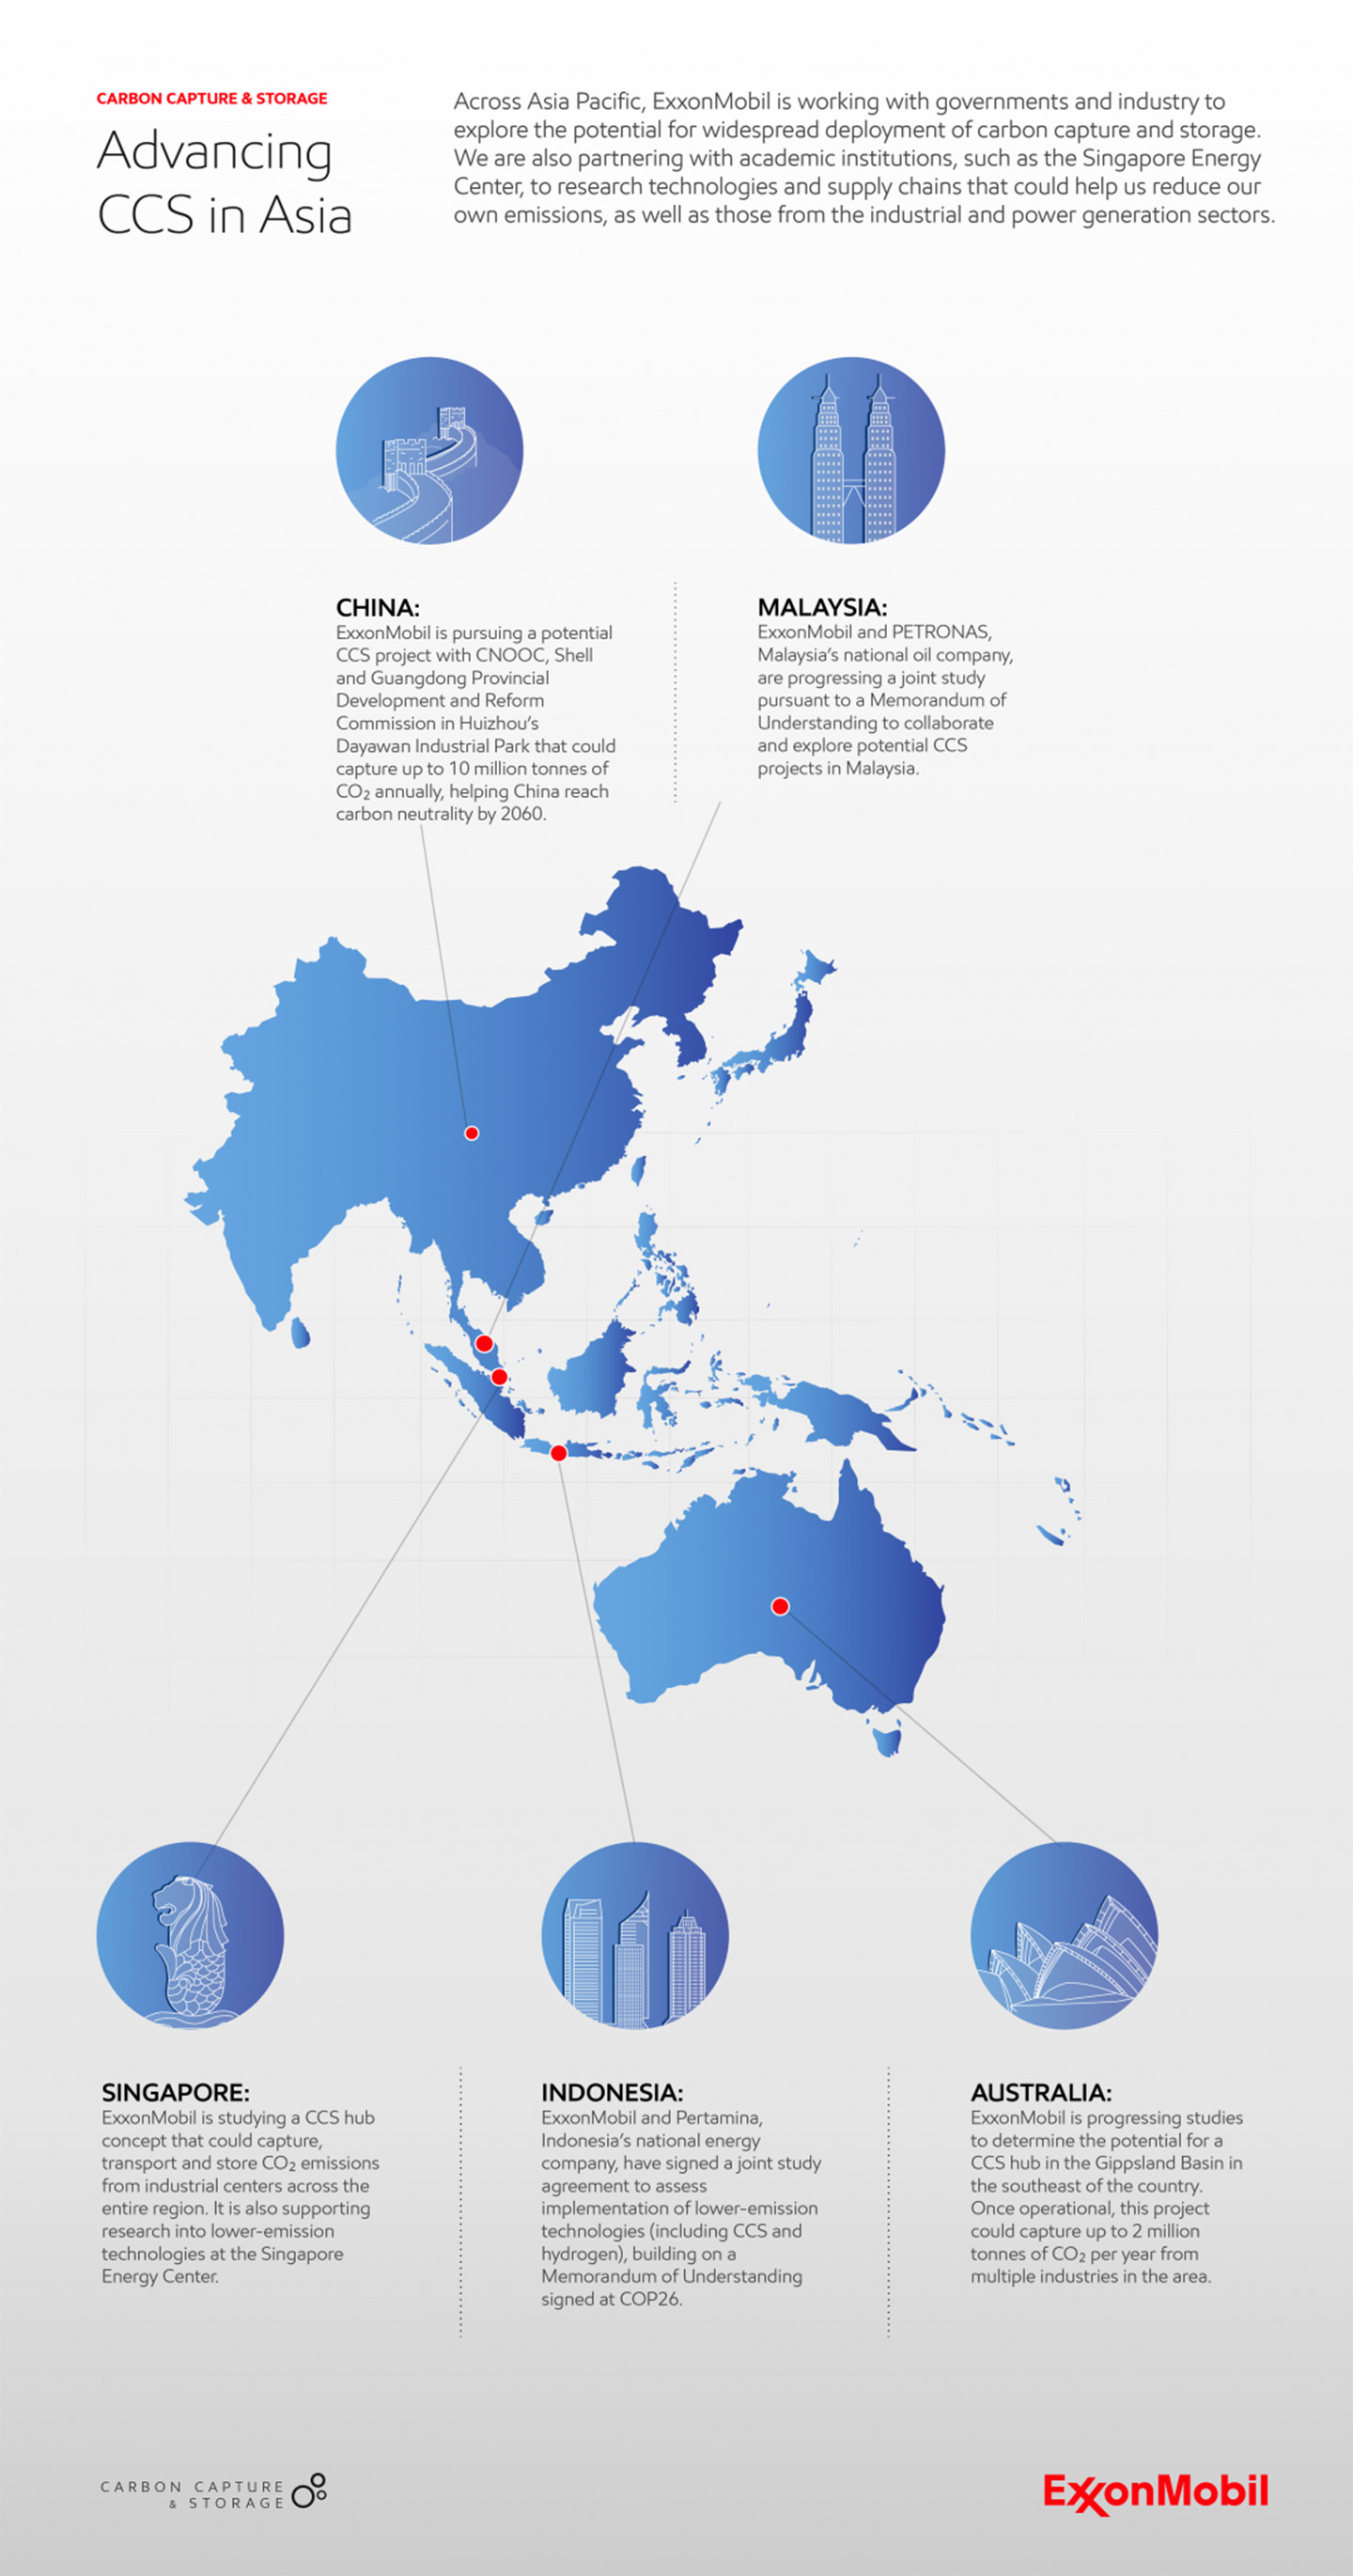 infographic identifying the Asia Pacific countries with carbon capture and storage activities in process